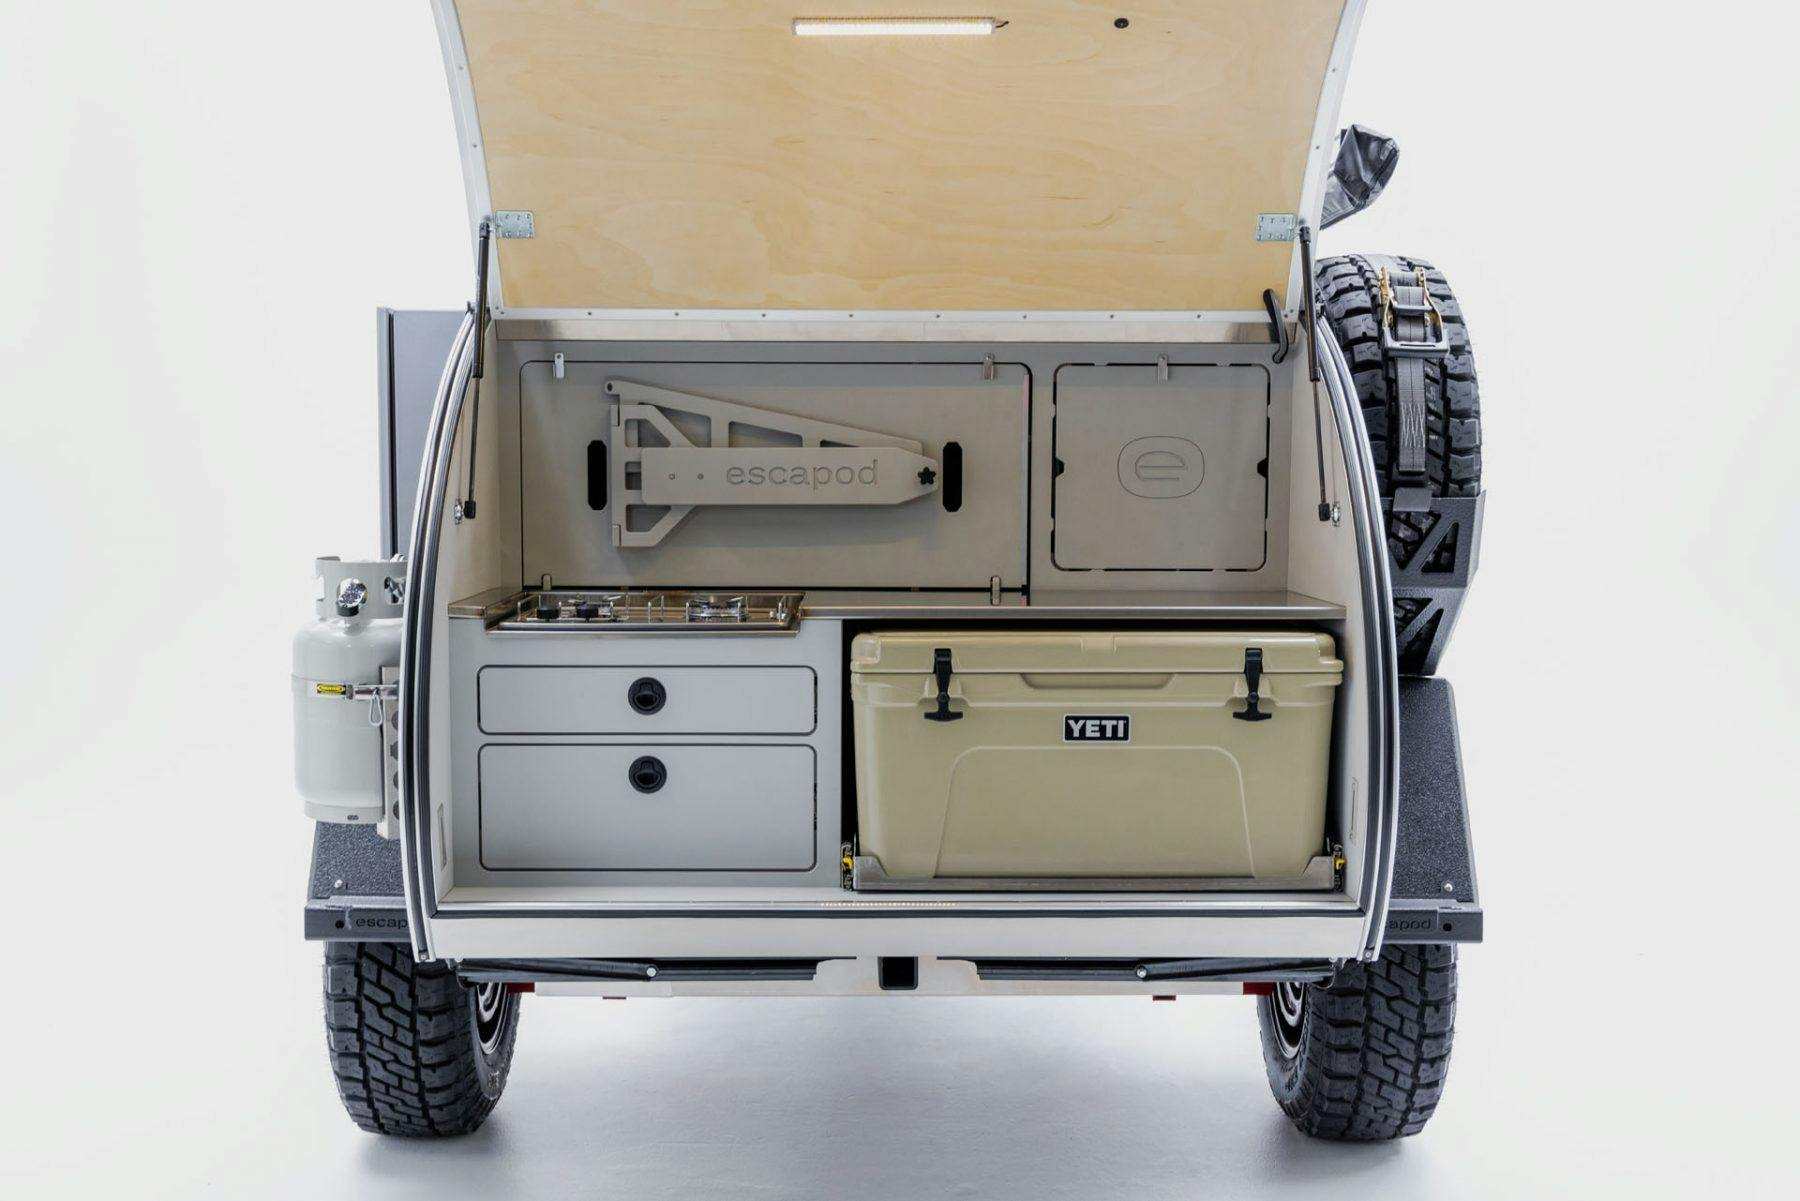 A galley shot of a teardrop camper, showing the storage, stove, and cooler.